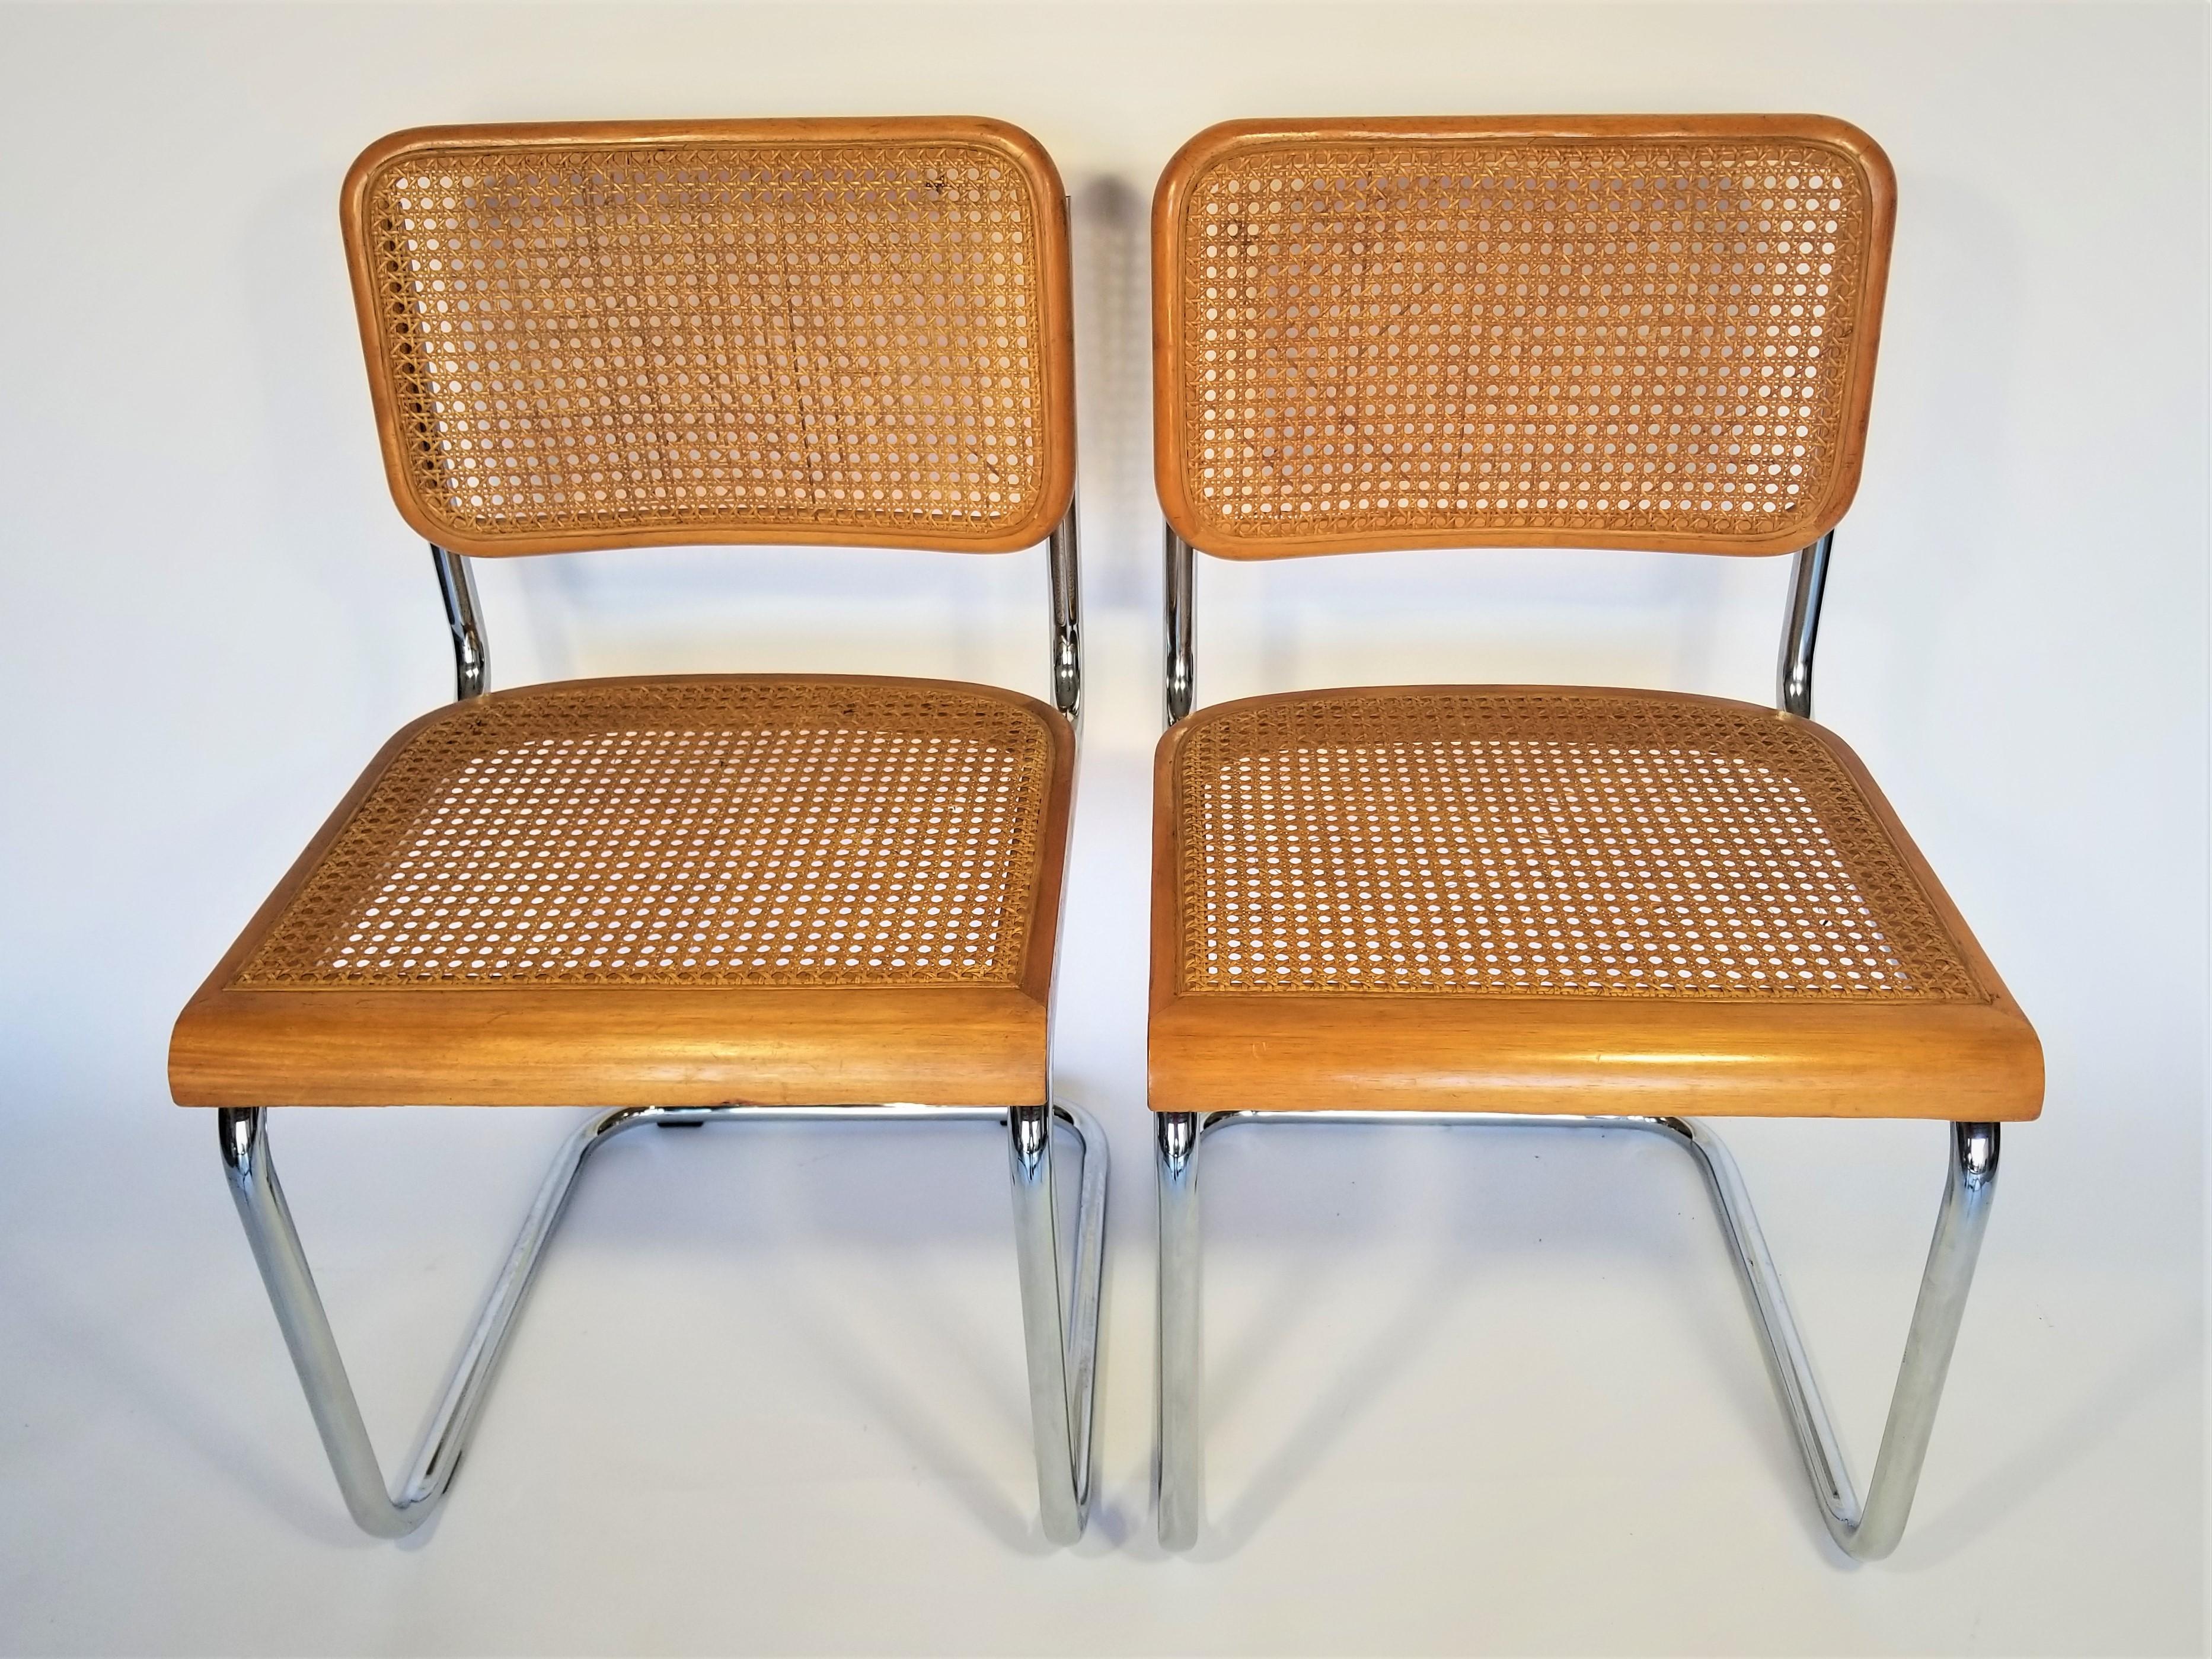 Pair of mid century Marcel Breuer Cesca side chairs in natural finish. Cane seats and backs. Classic chrome cantilever frames. We polish all chrome. 

Complimentary local delivery in NYC and surrounding areas can be arranged for this item.